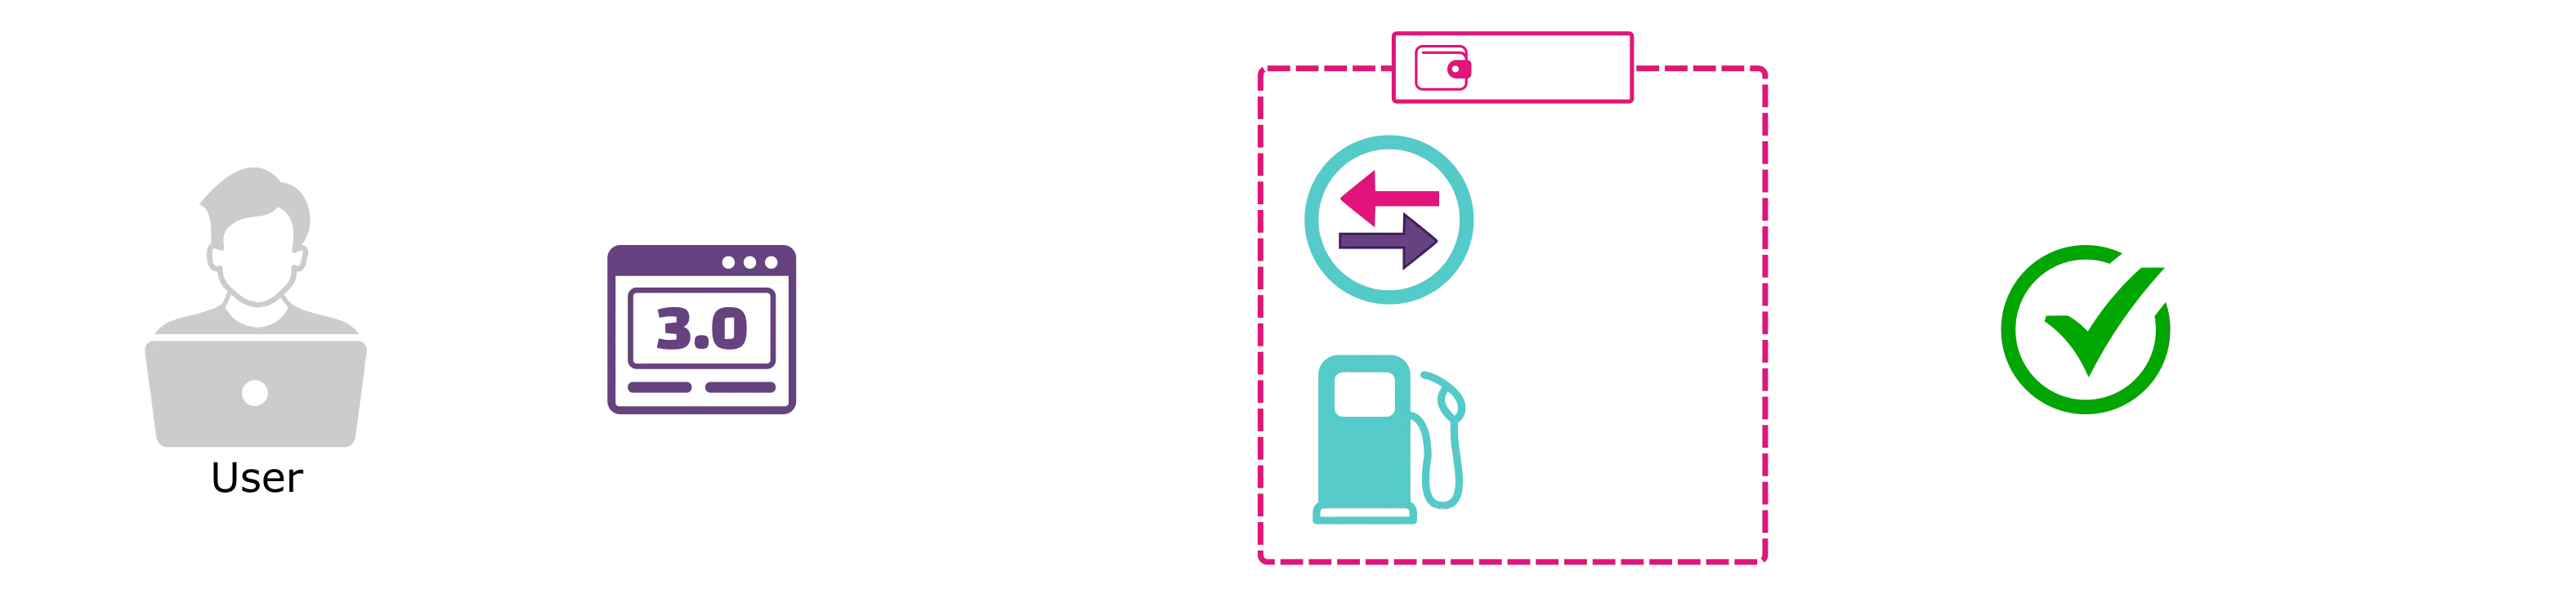 Flow of a transaction